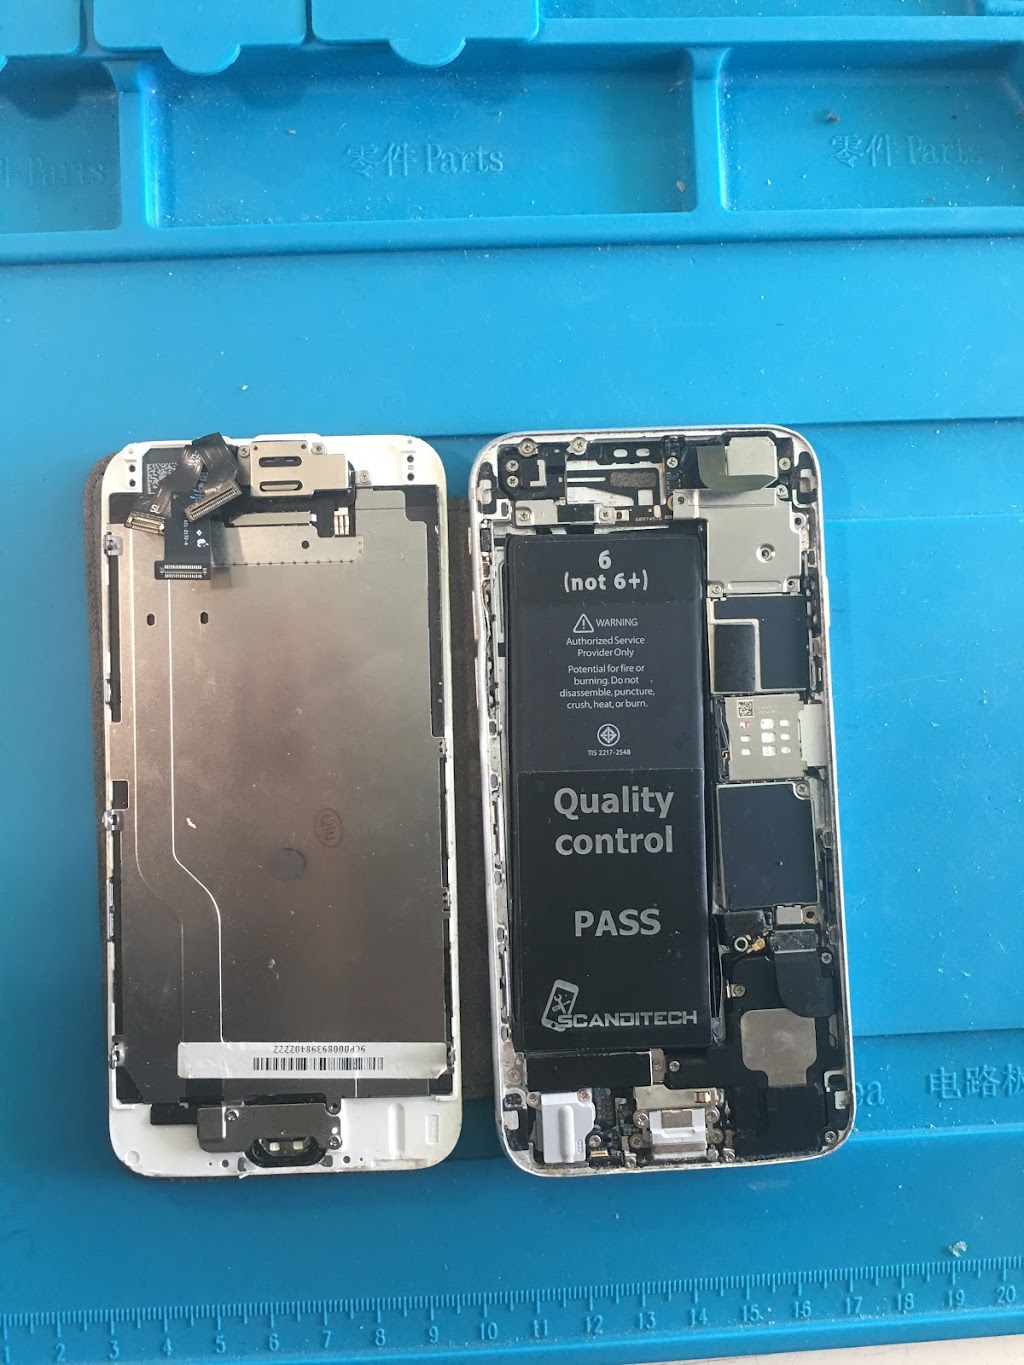 Stop And Fix iPhone Repair | 1818 Old Cuthbert Rd, Cherry Hill, NJ 08034 | Phone: (856) 741-1212